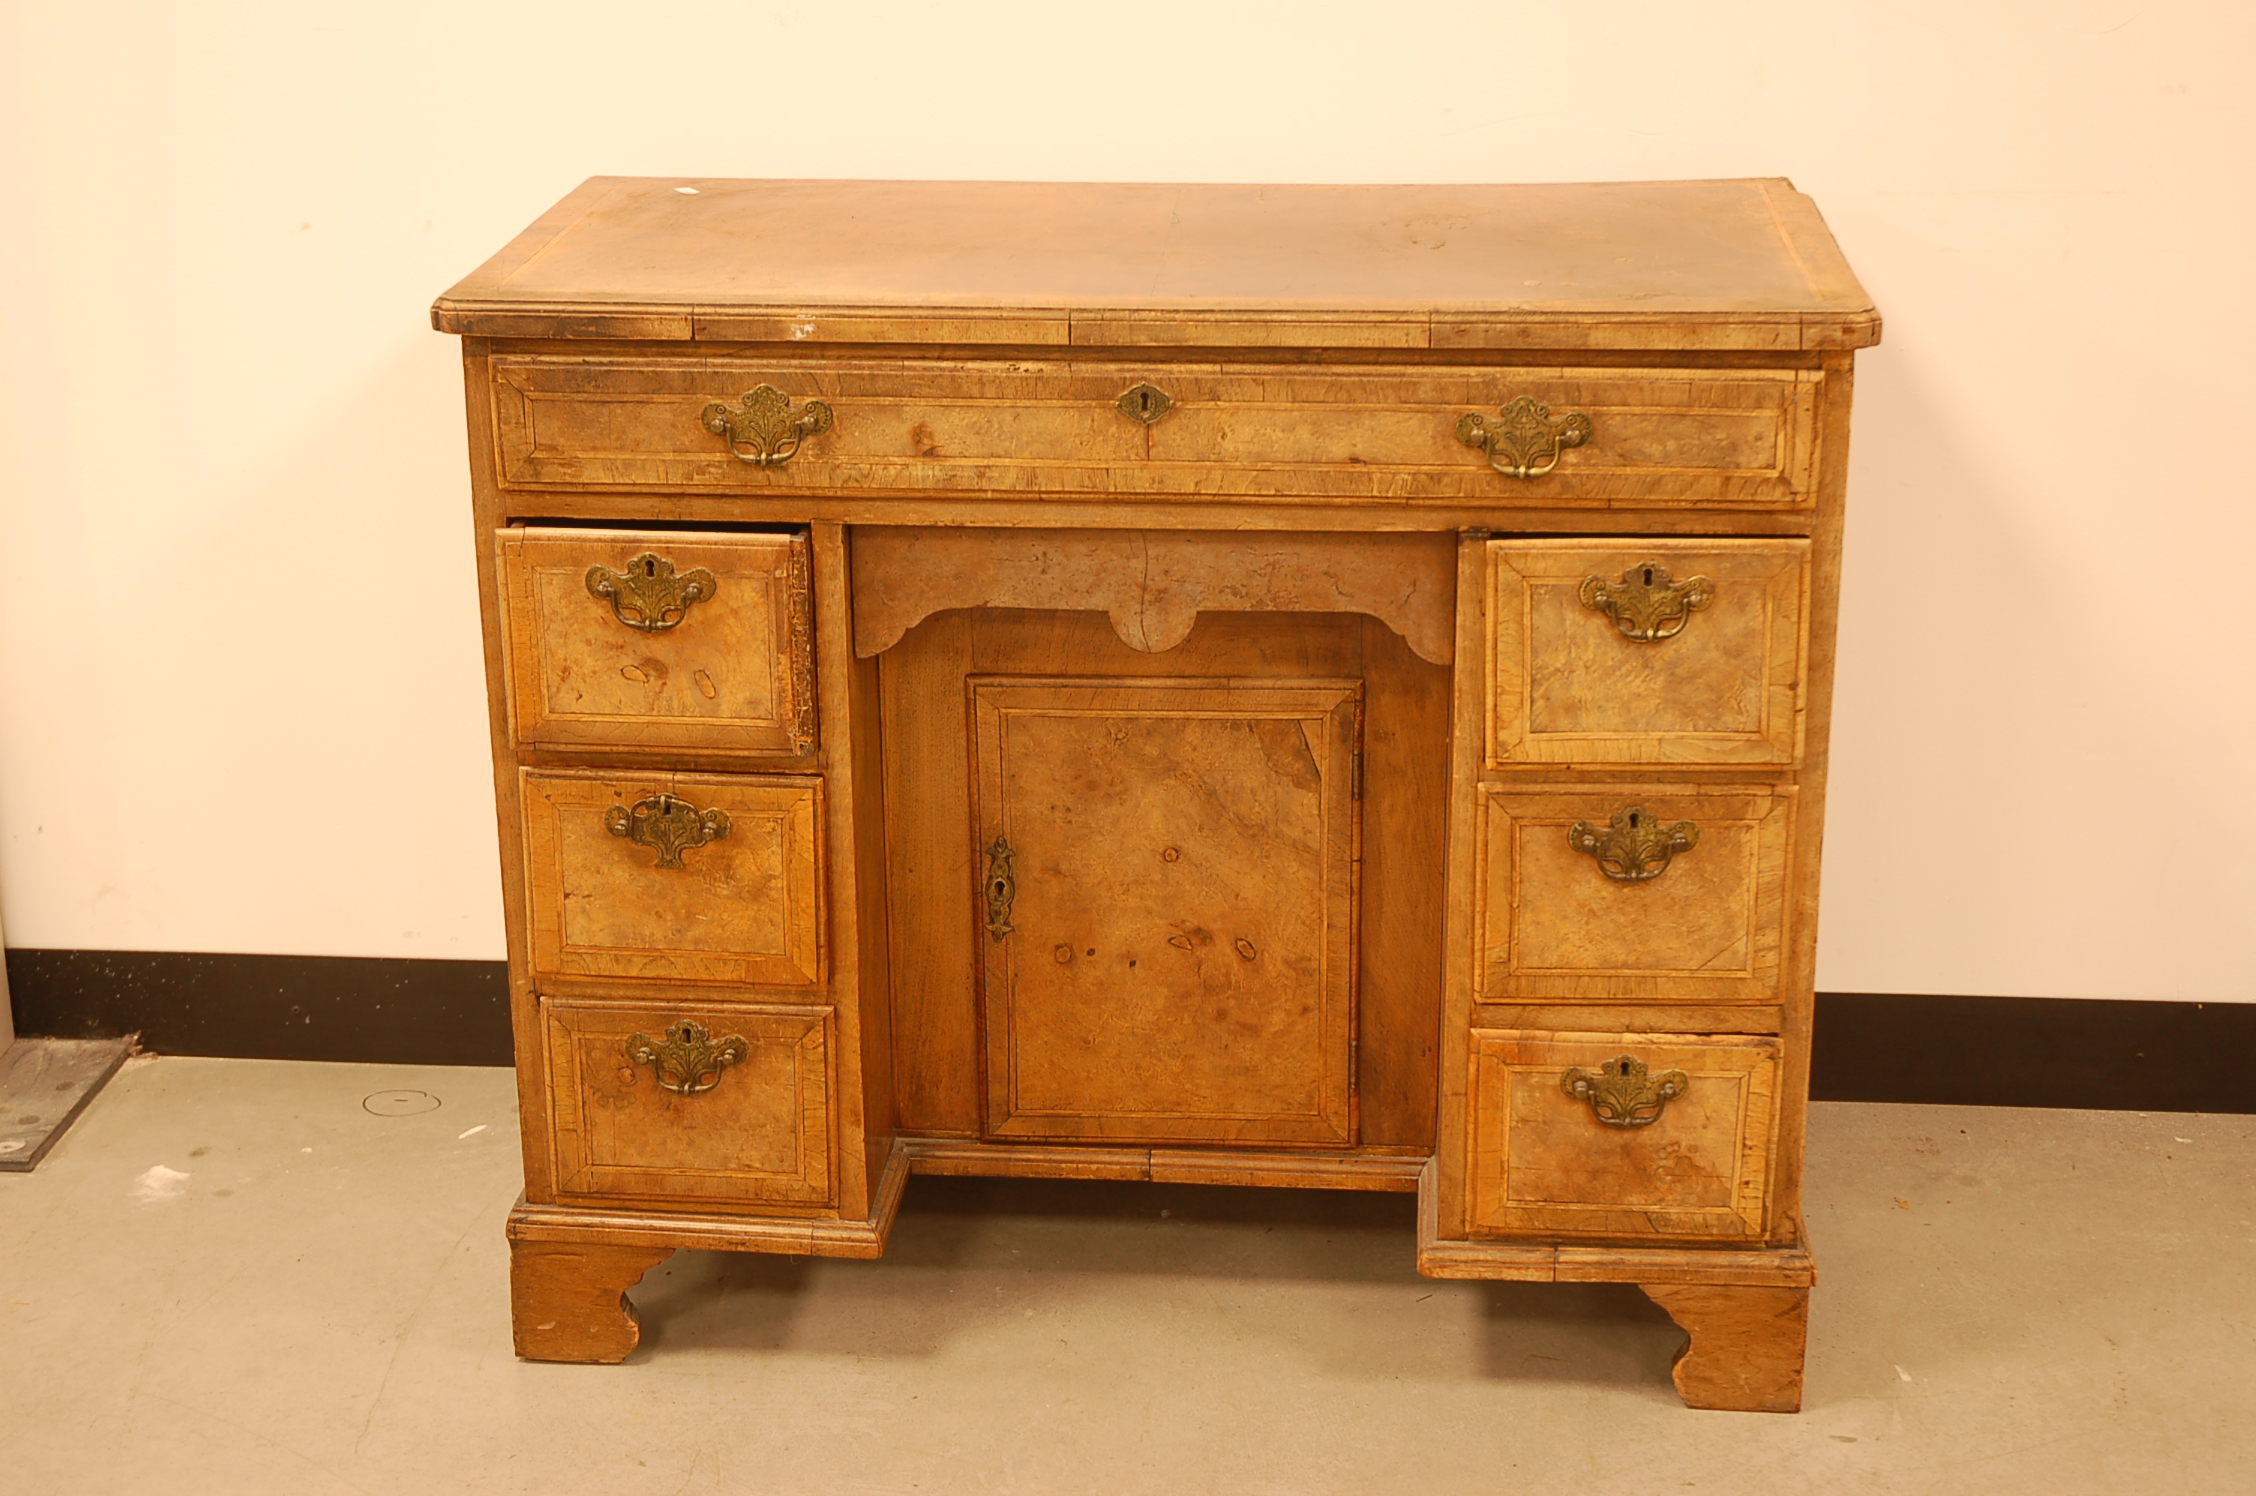 An 18th century walnut and inlaid kneehole desk, 90cm wide, AF, heavily faded